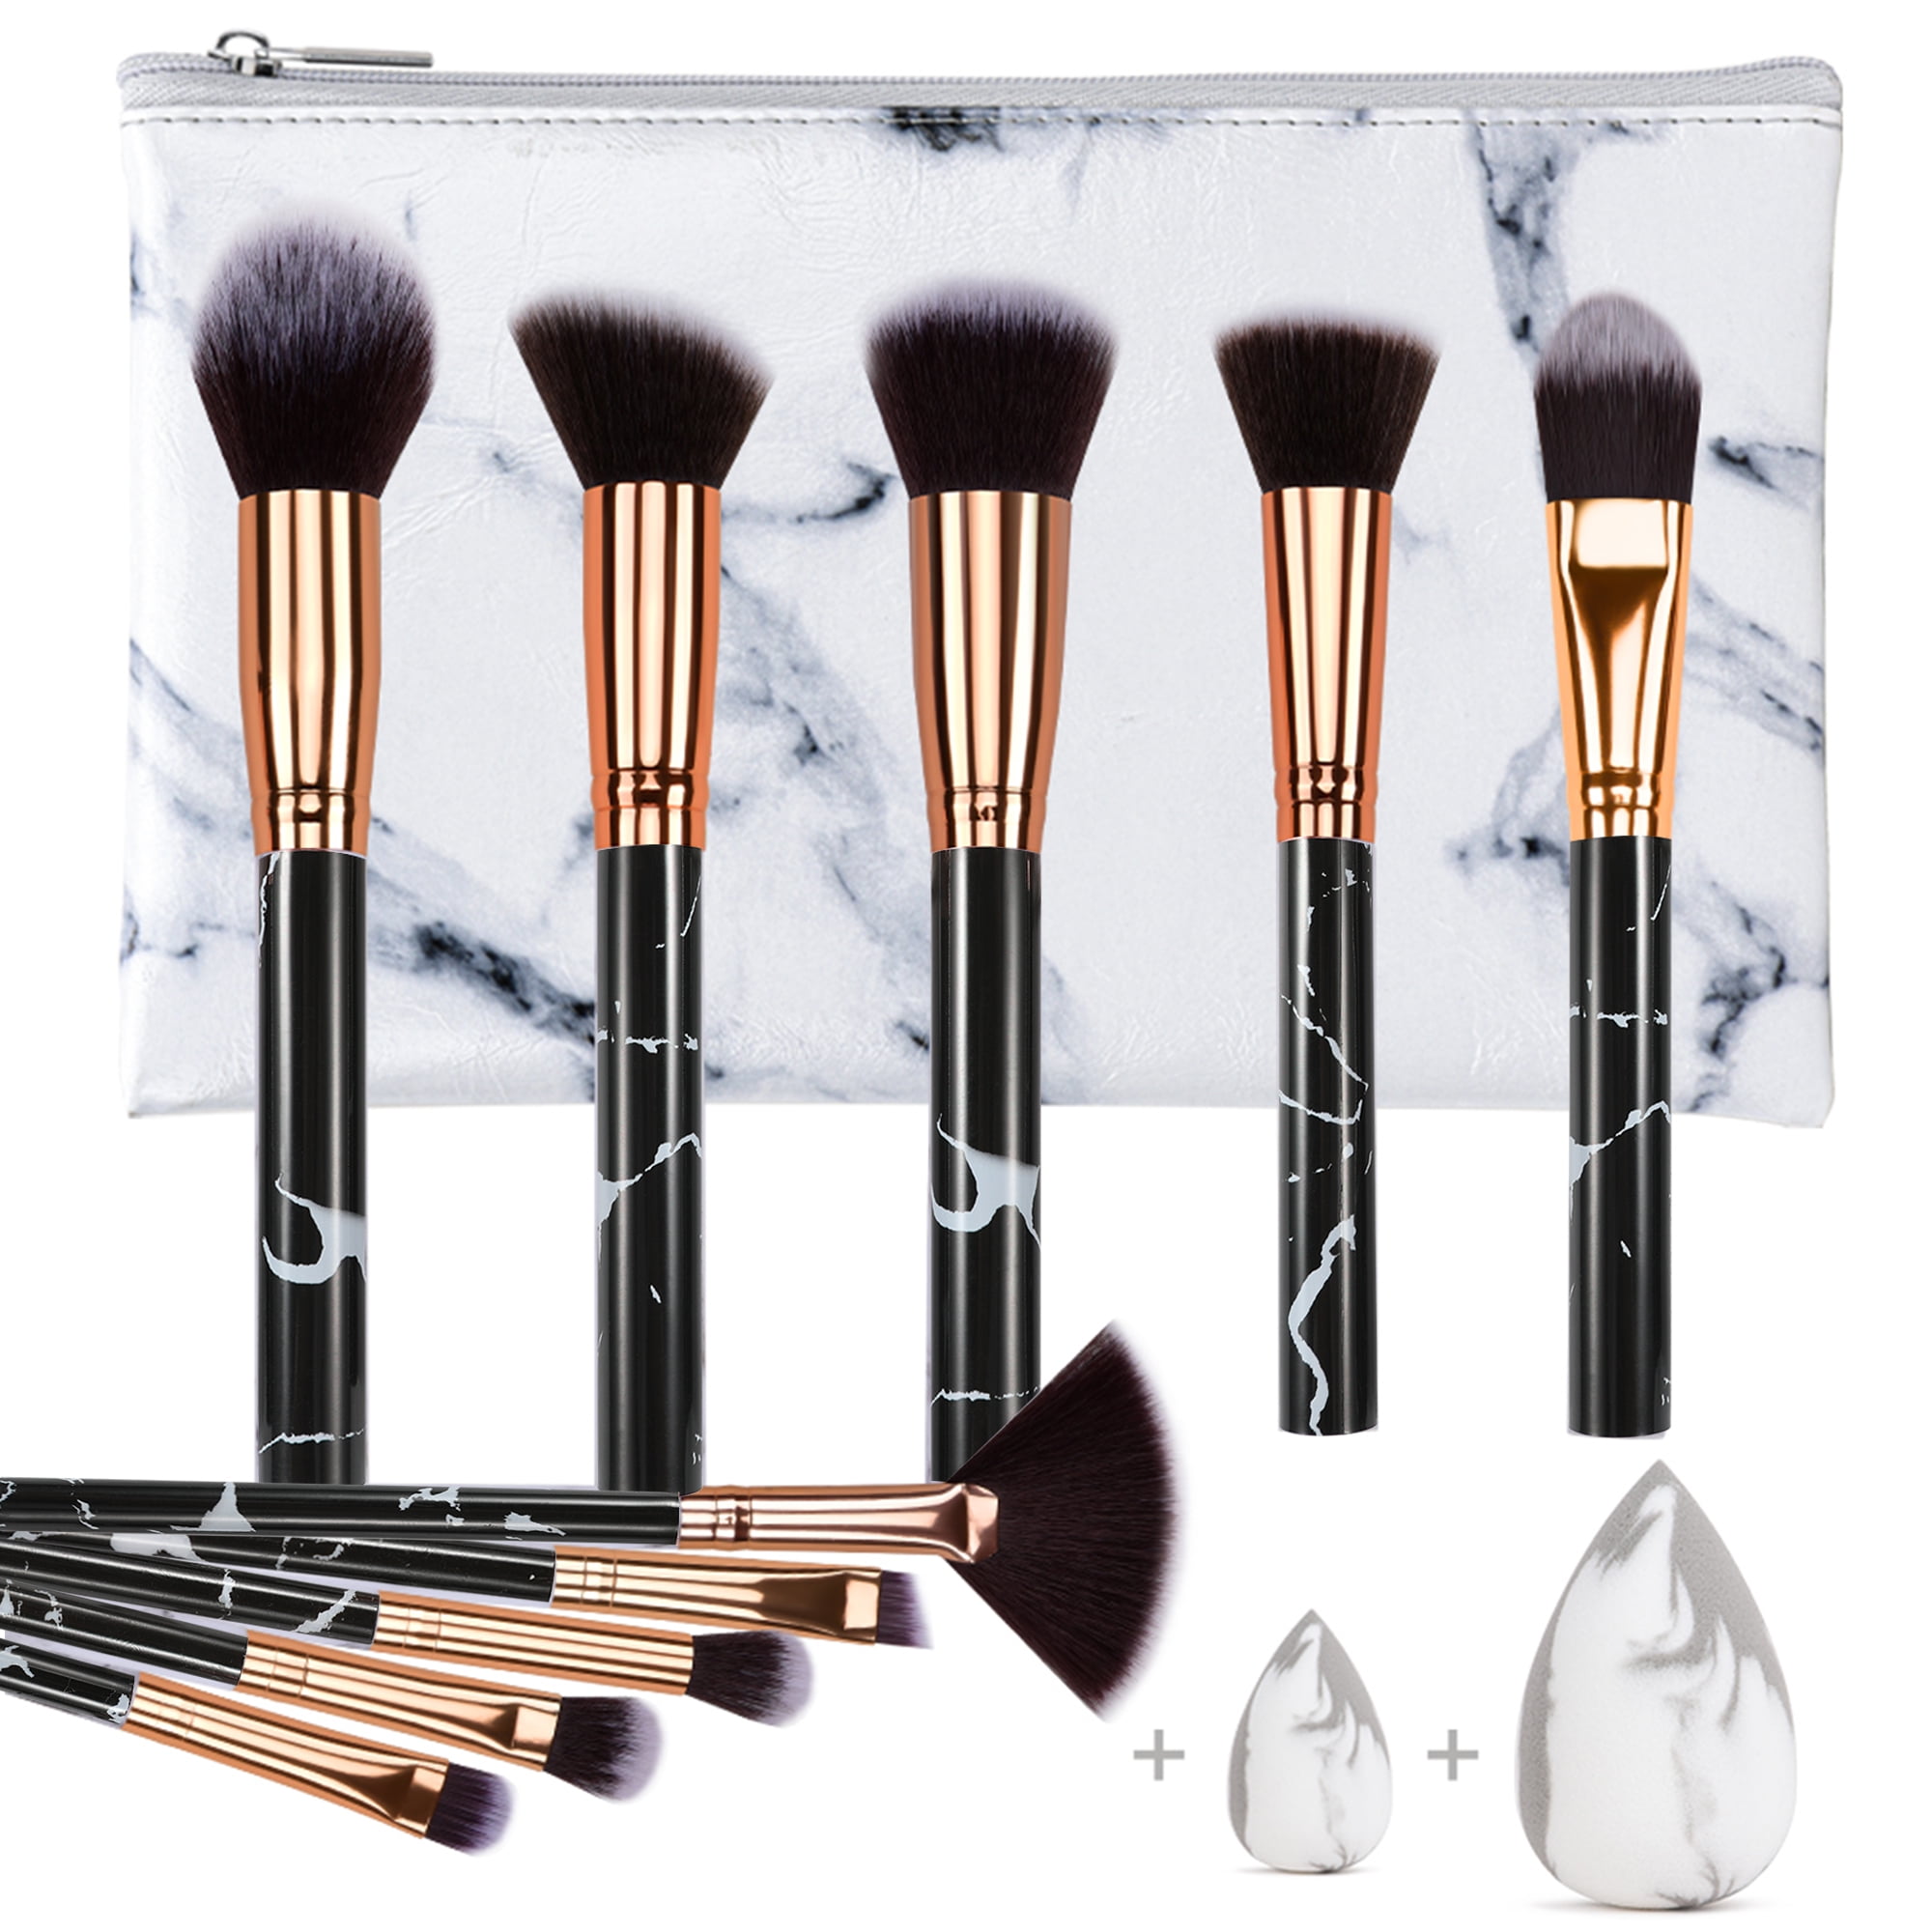 Real Technique 5 pieces Full Brush Set - Zuba Online Mall